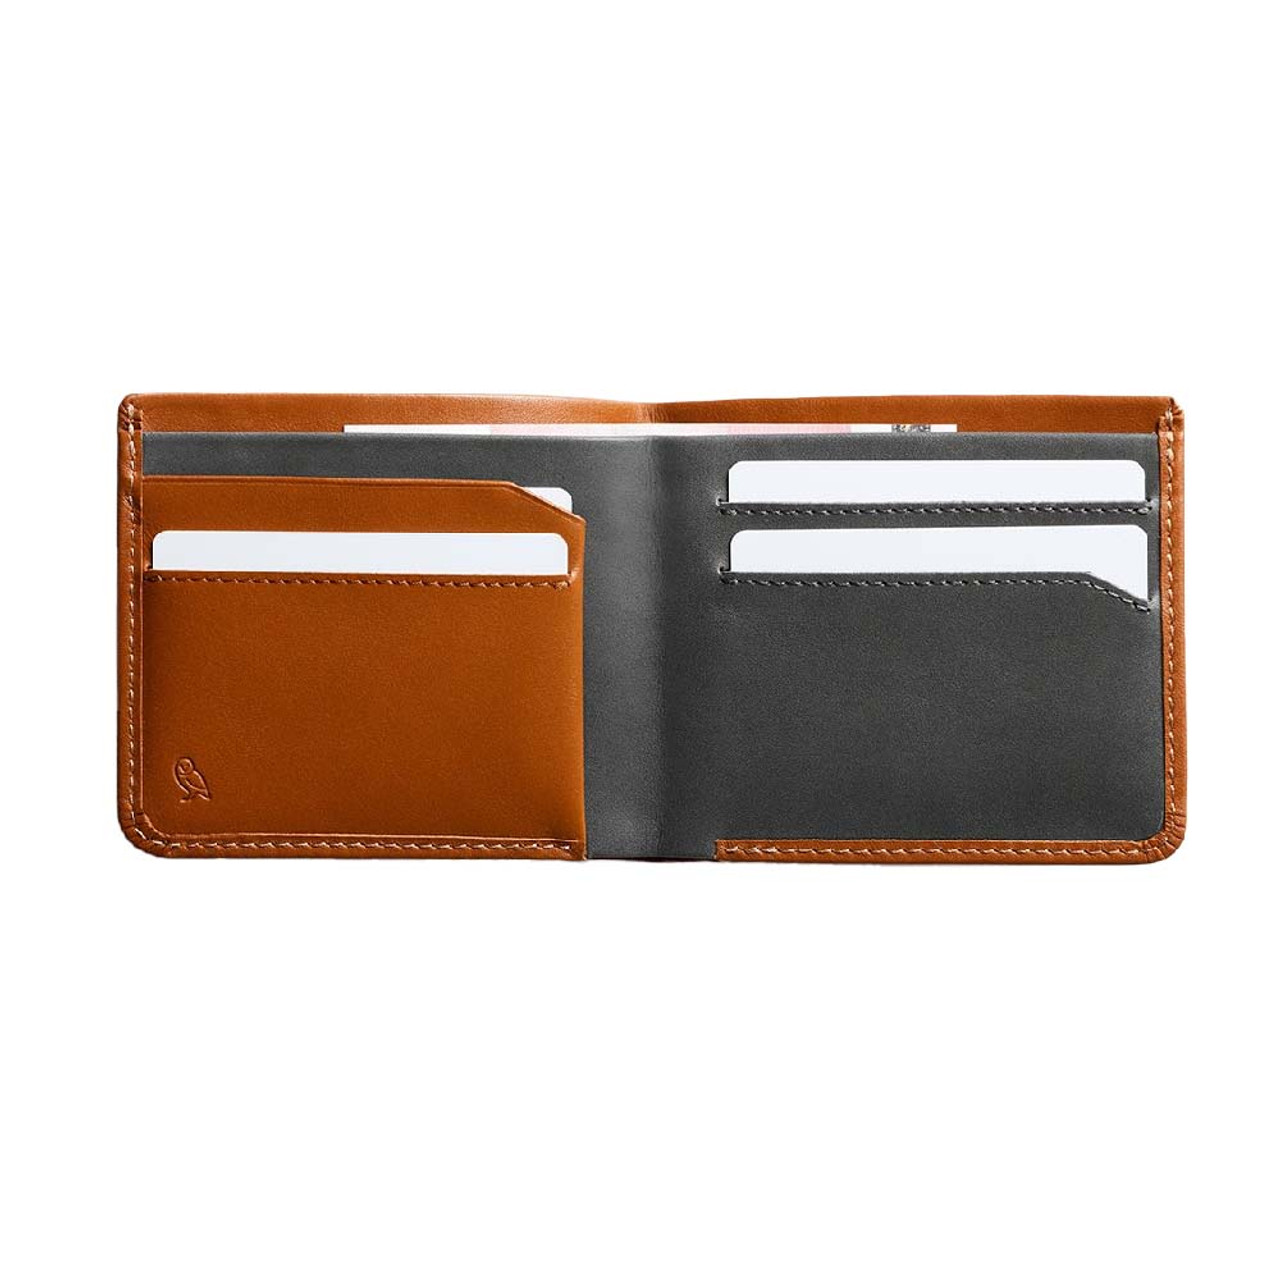 BELLROY The Square Leather Wallet Caramel